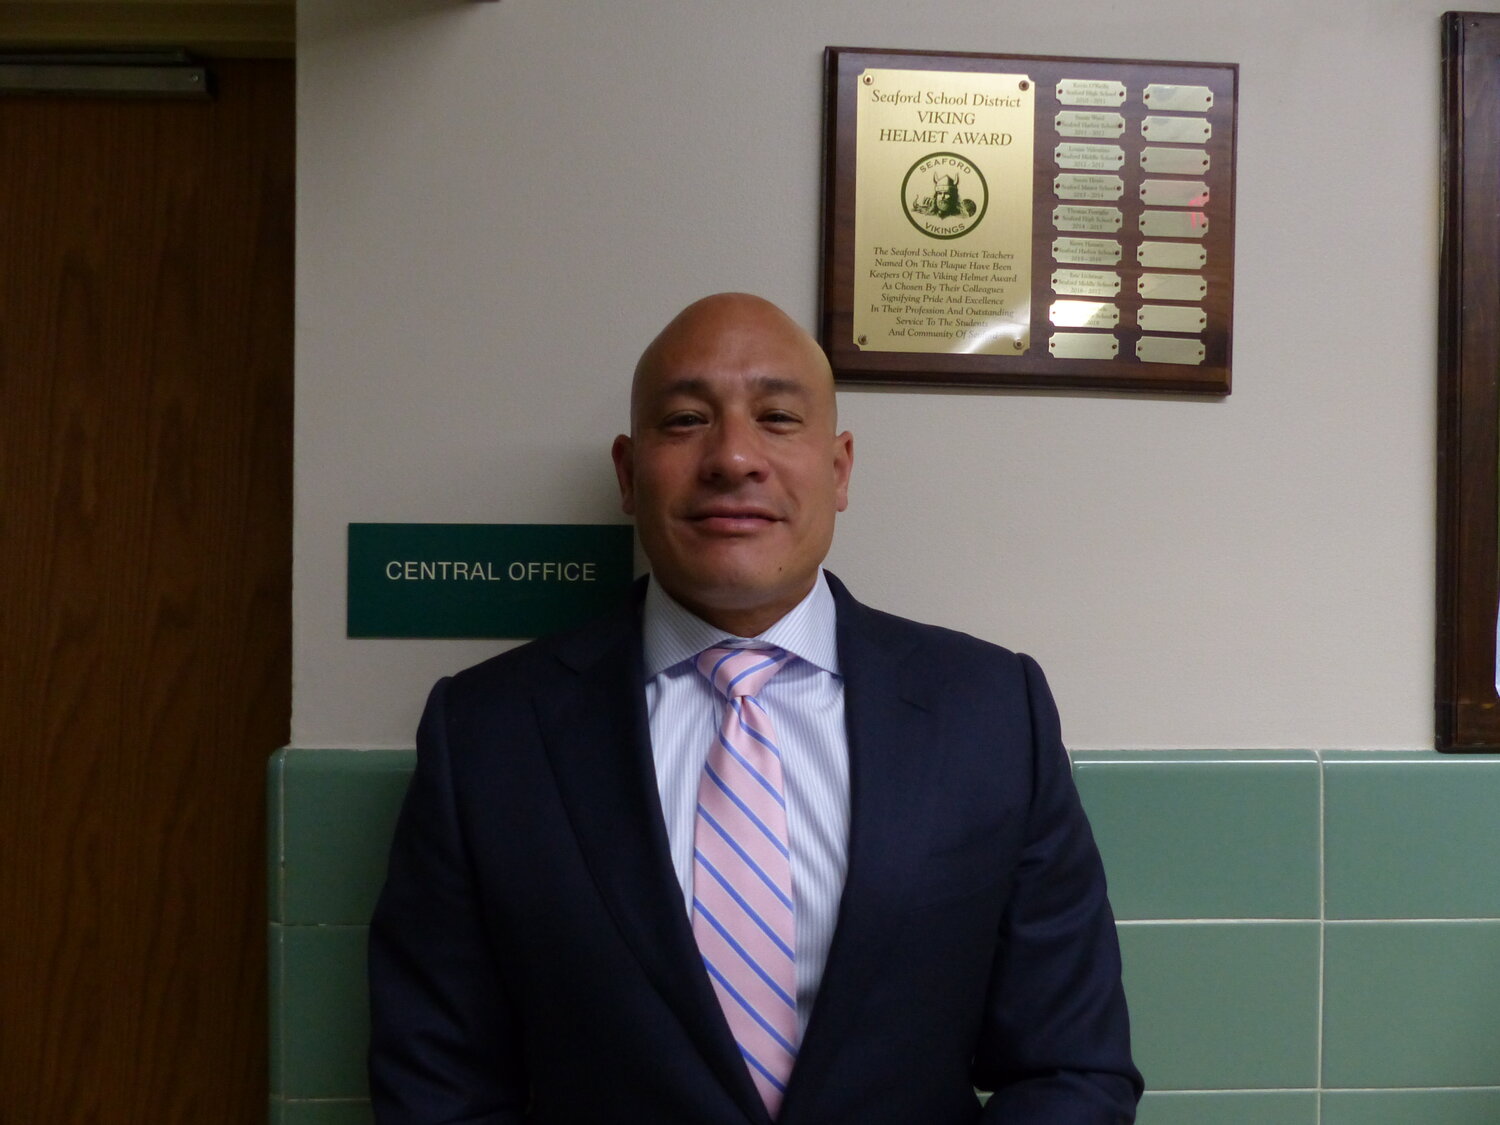 Jeayoung "Jimmy" Chwe has been elected to the Seaford Board of Education.